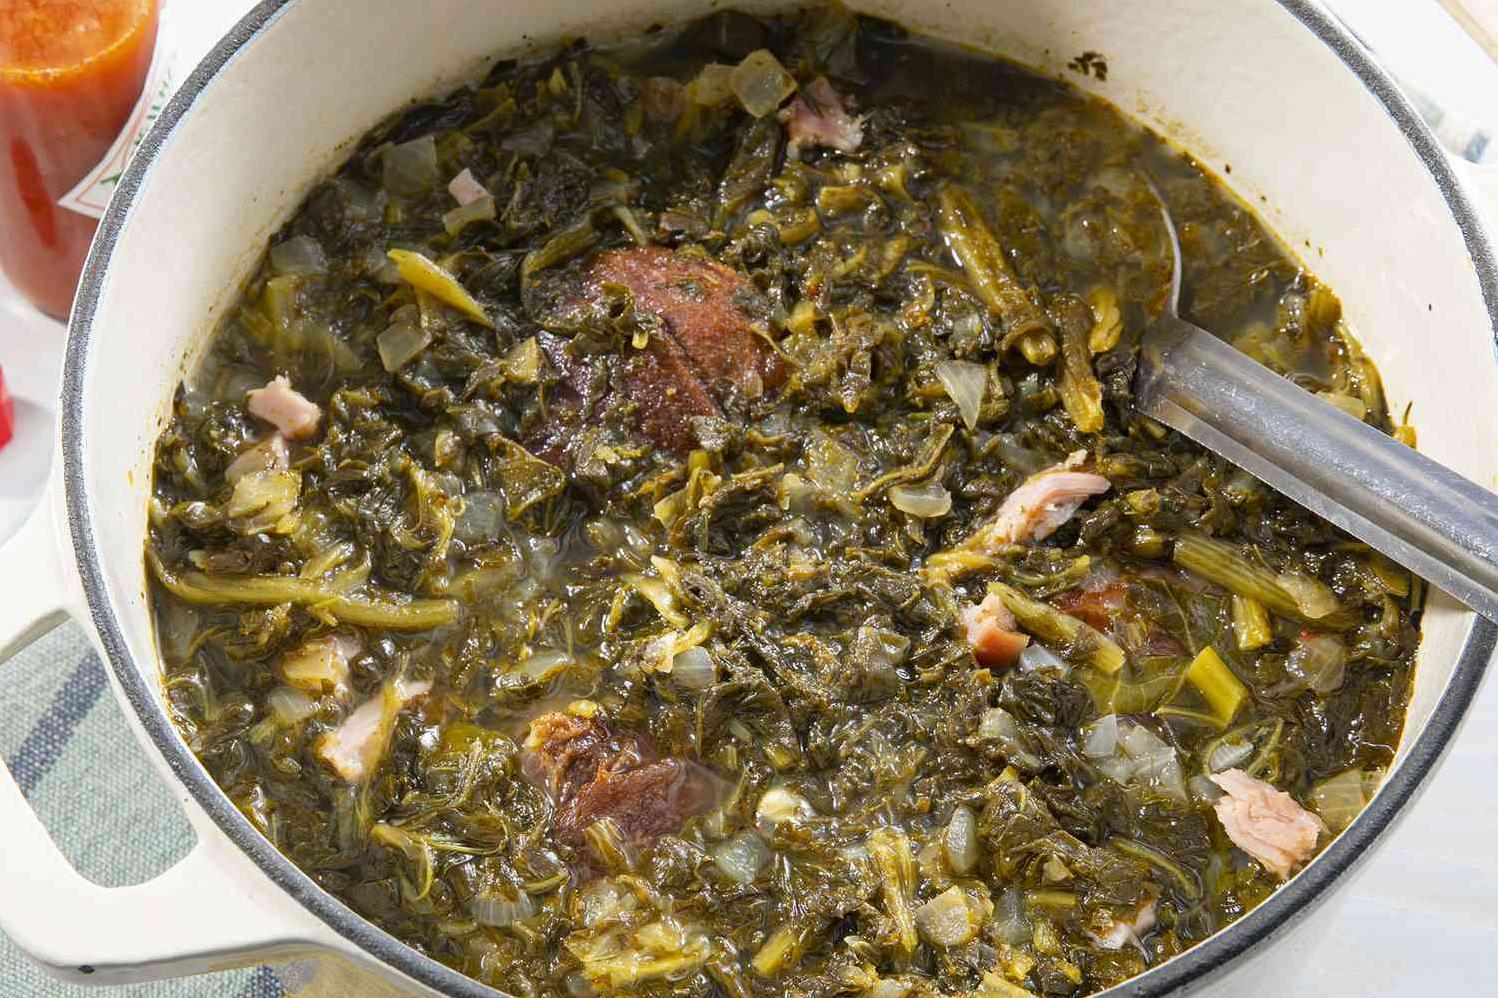  Just one bite of these collard greens and you'll feel like you're in the heart of Dixie